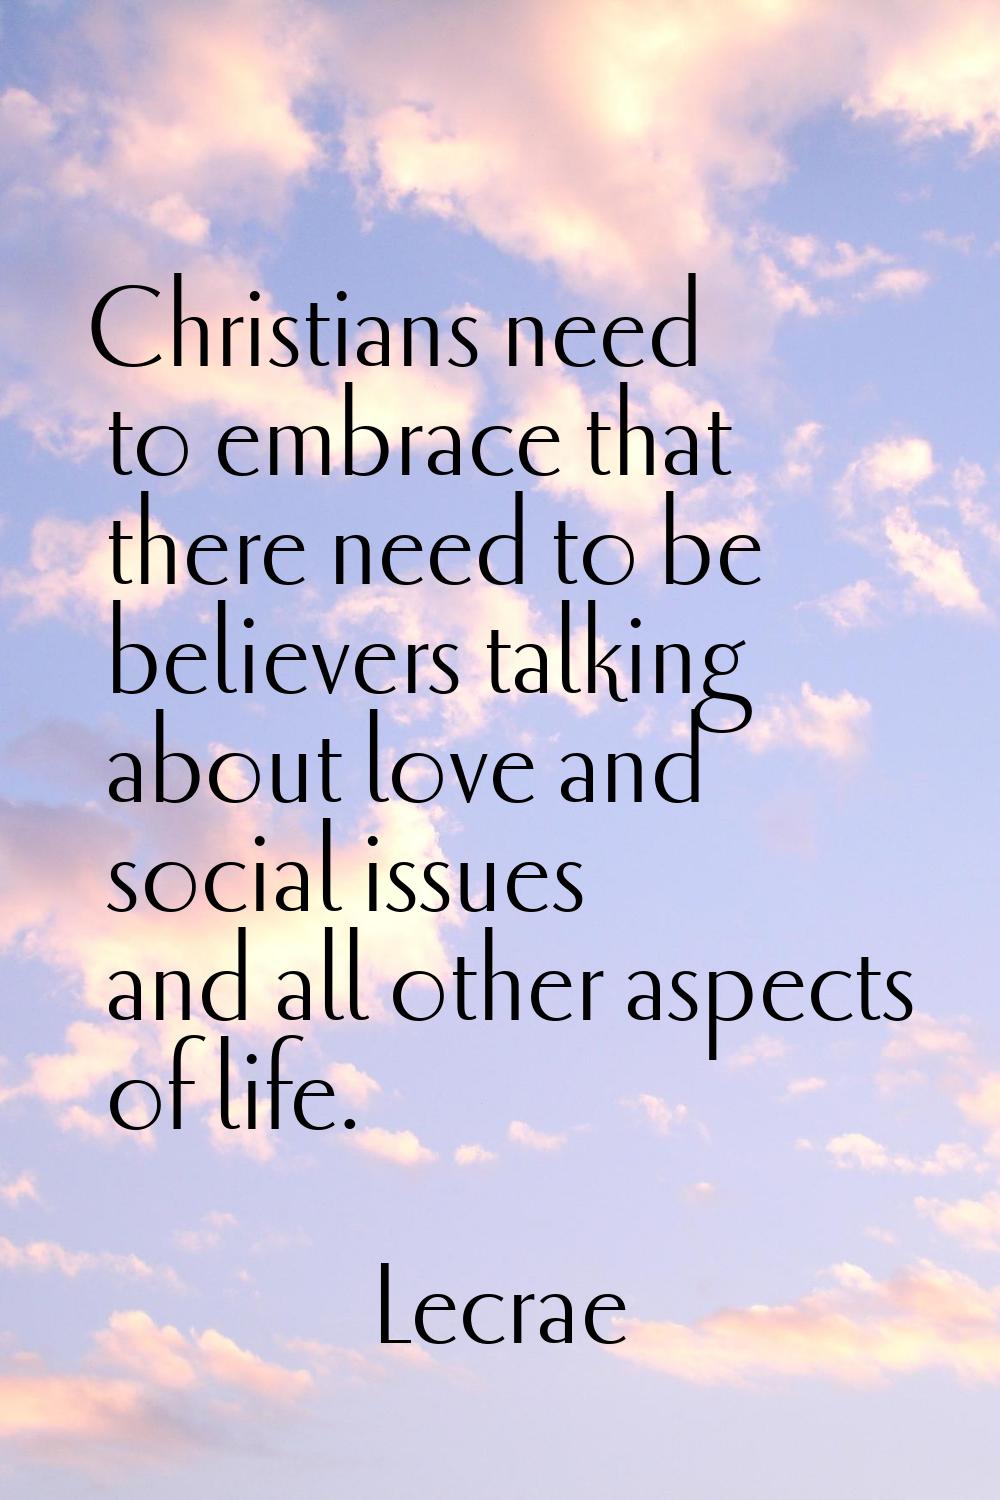 Christians need to embrace that there need to be believers talking about love and social issues and